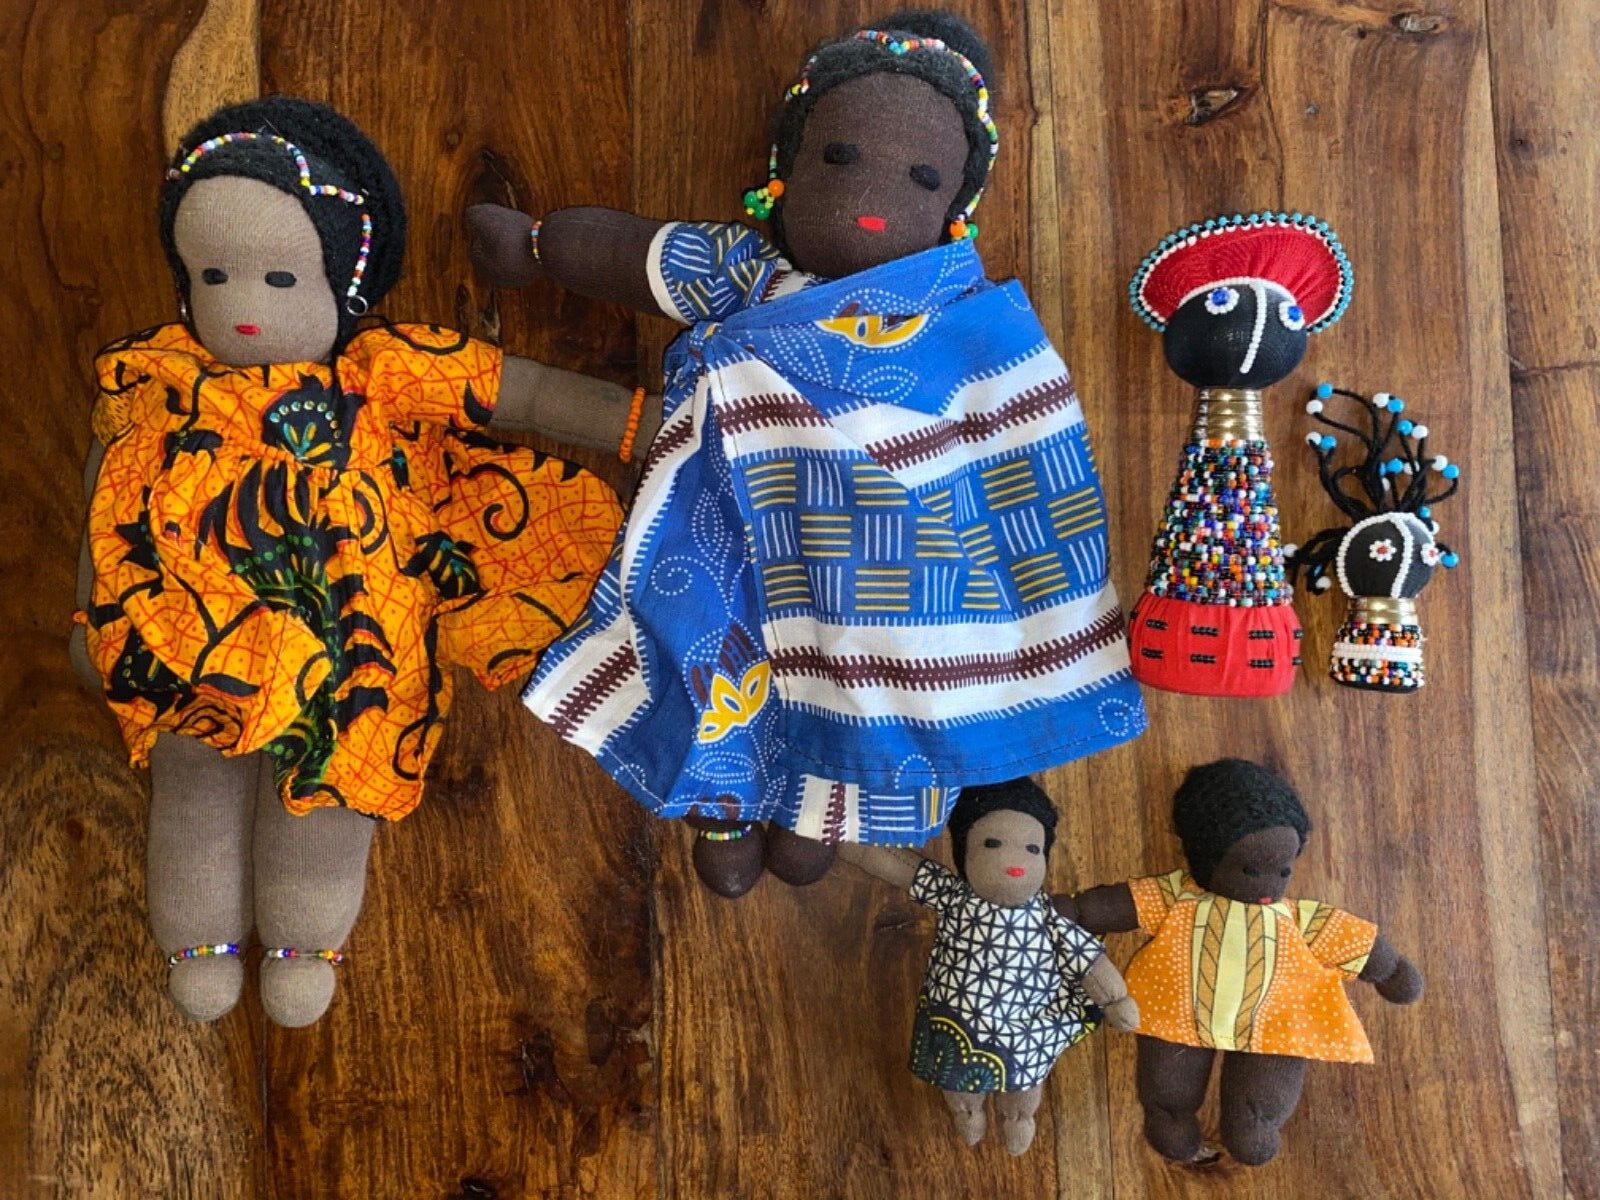 Lot of 5 Authentic South African Handmade crafted Dolls